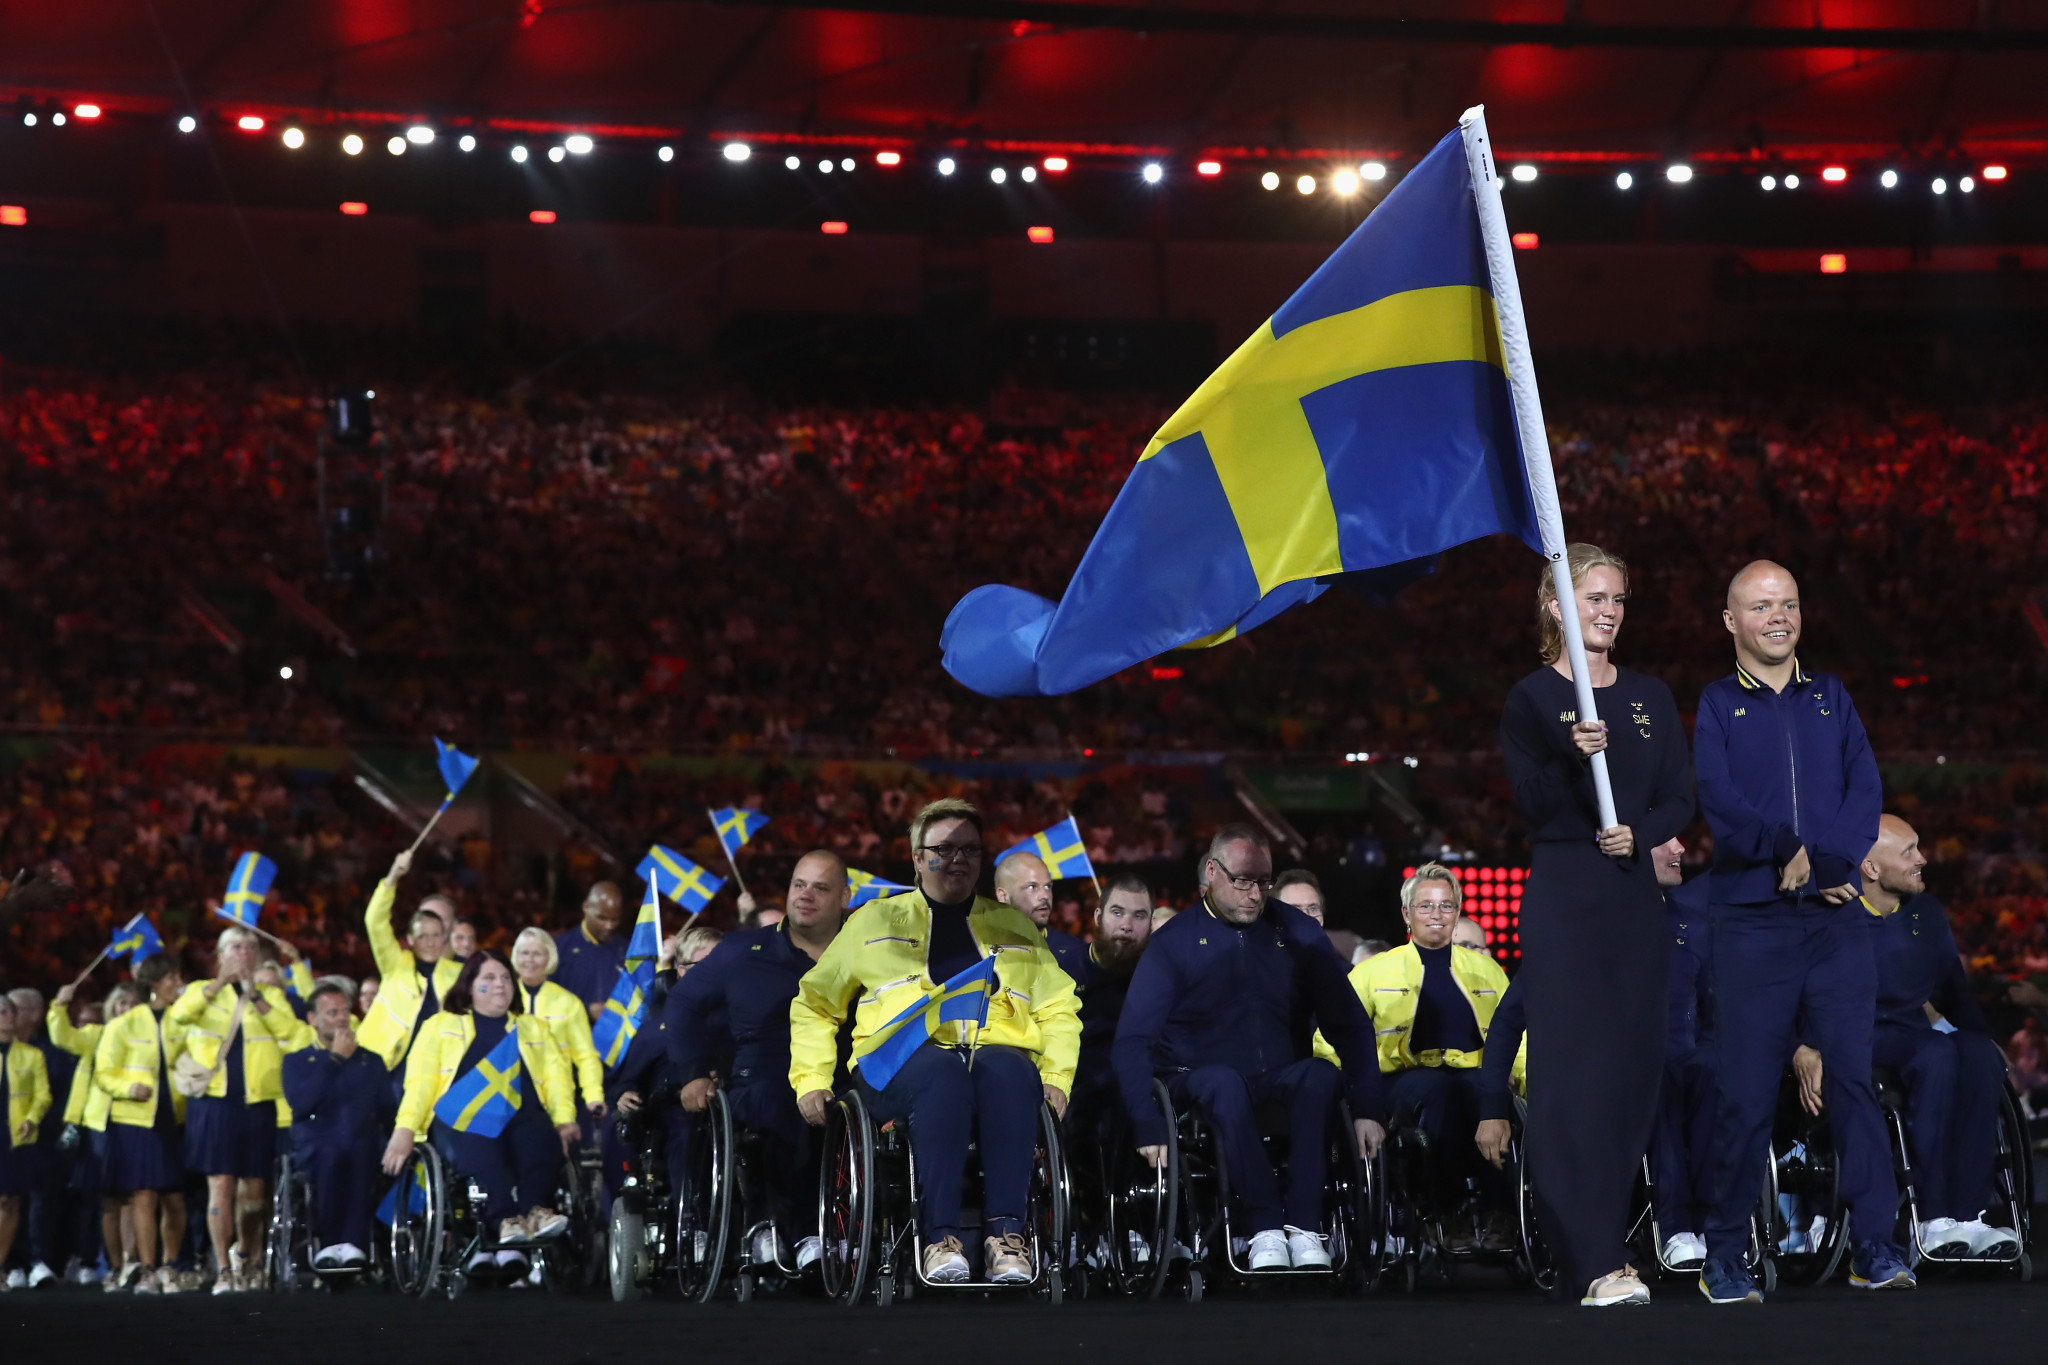 Åsa Llinares Norlin will be in charge of the Swedish Paralympic Committee when the country participates at Tokyo 2020 and Beijing 2022 ©Getty Images